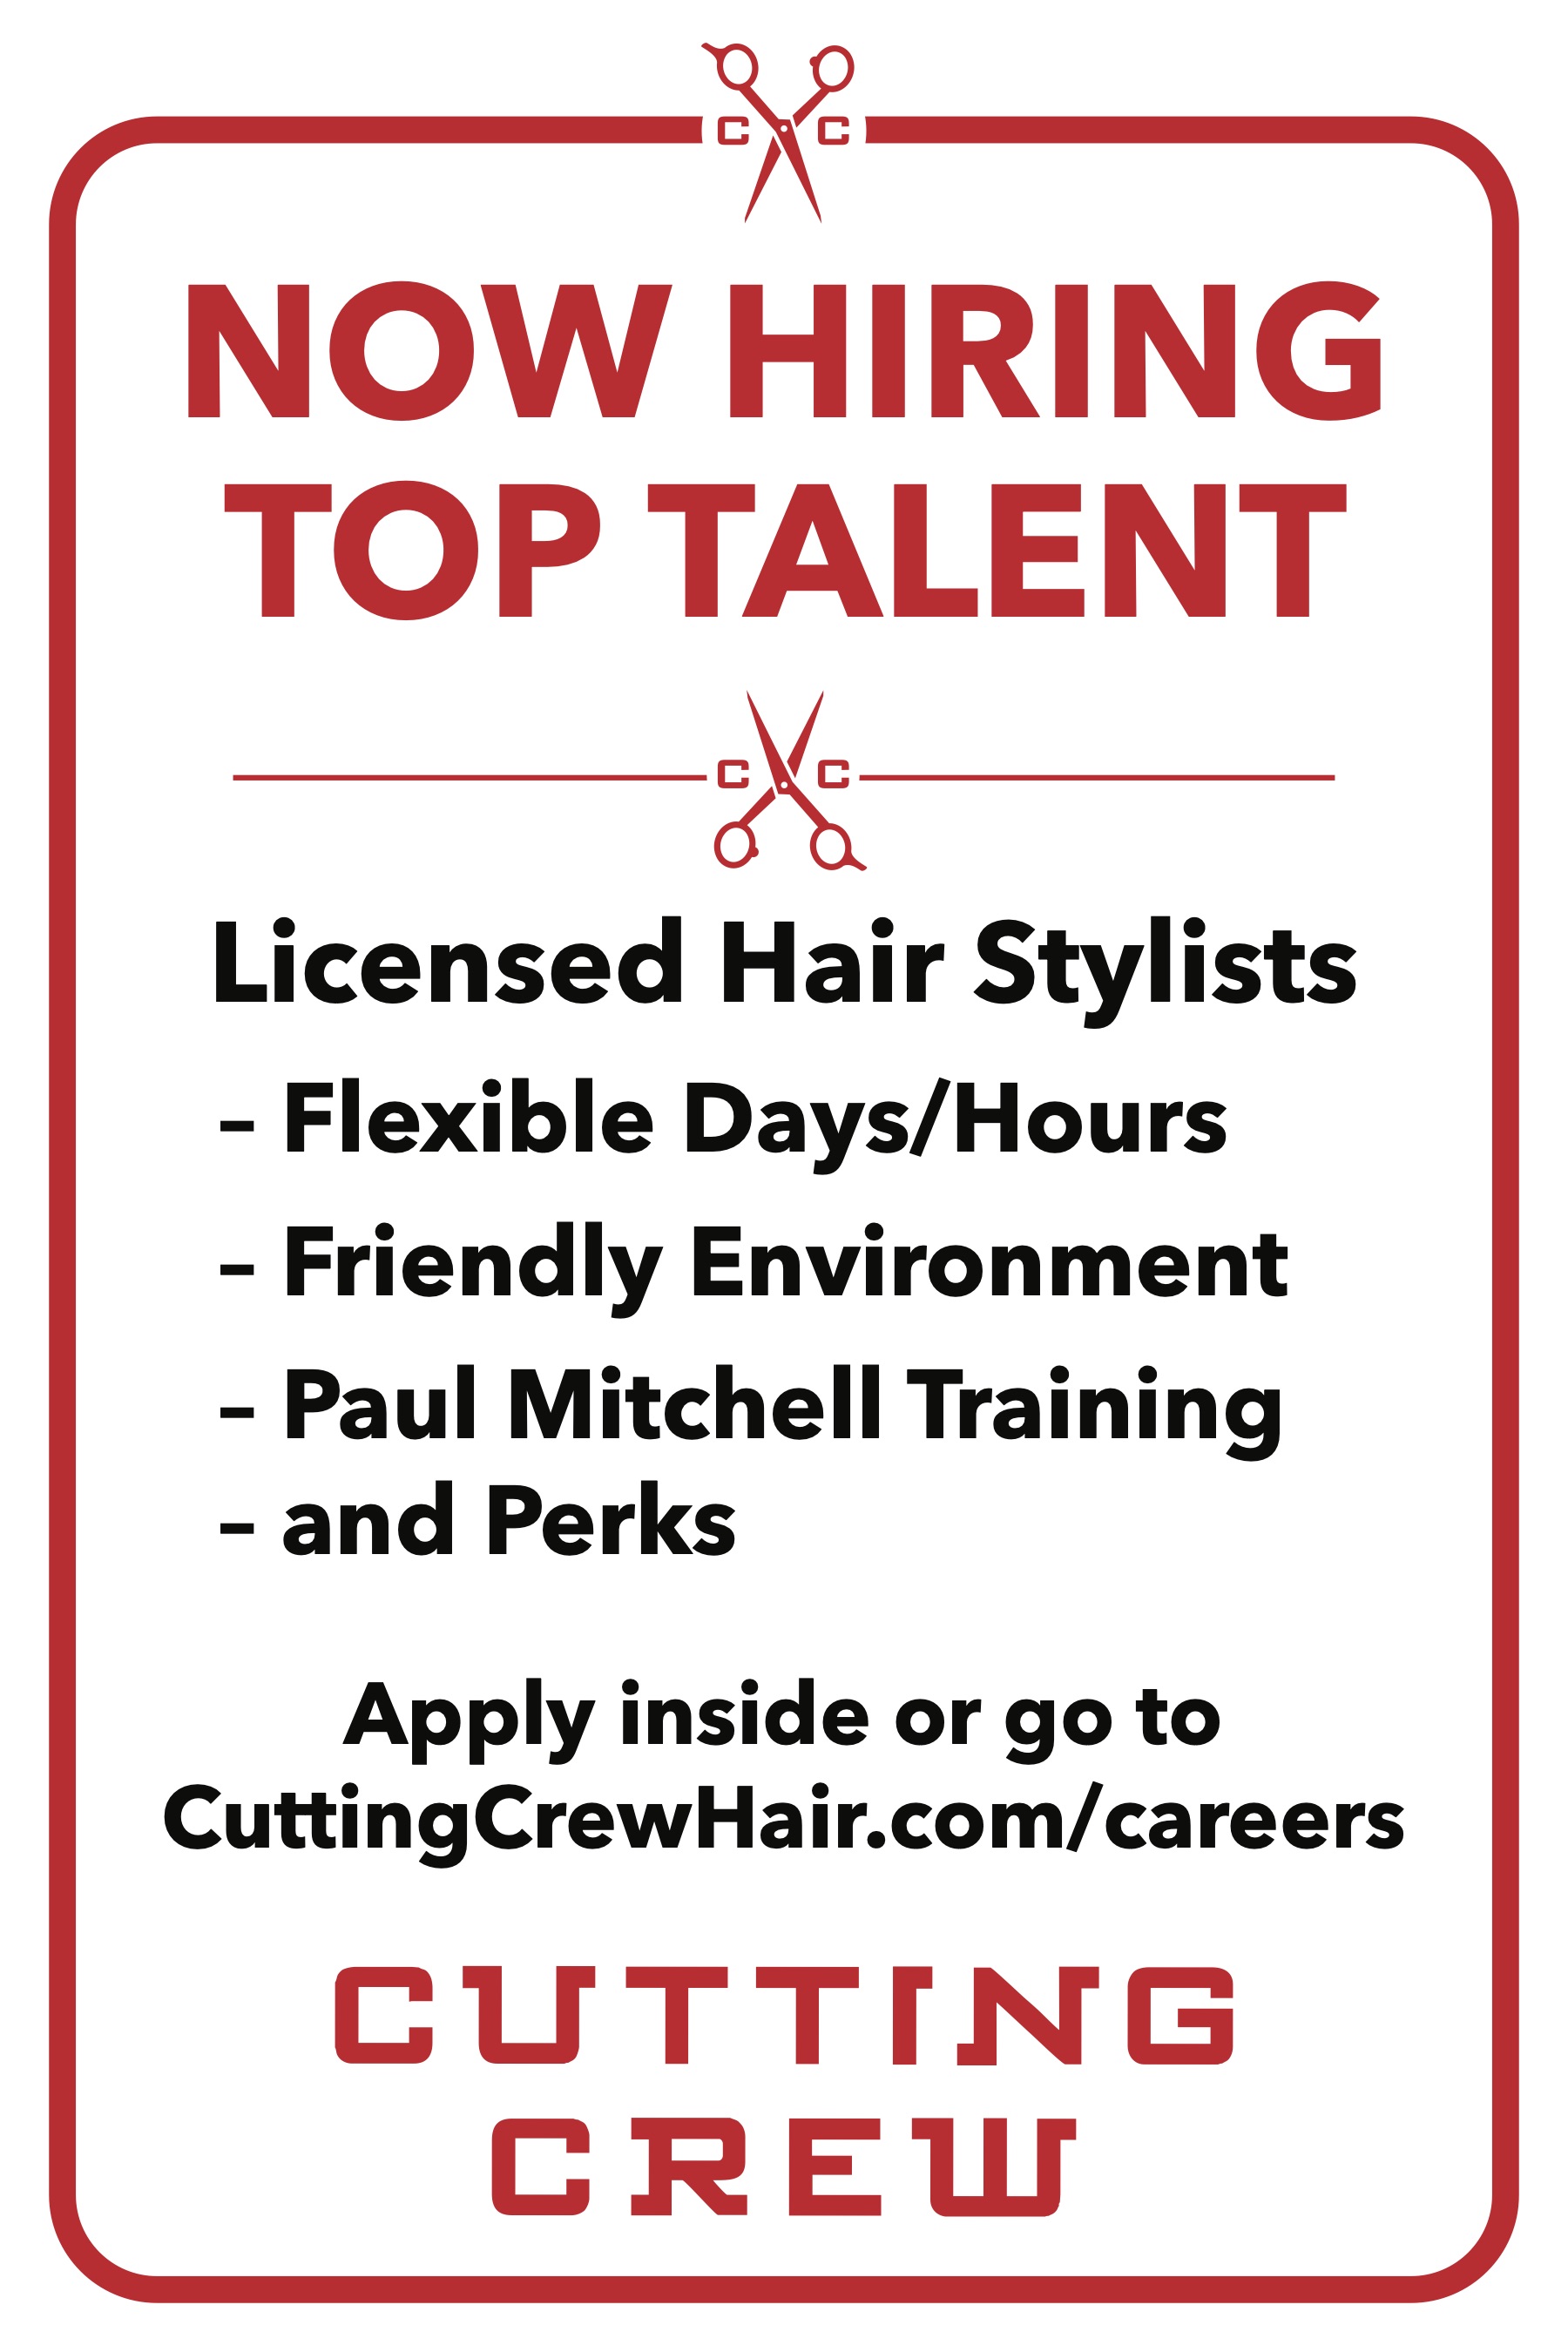 Jump start your career today with the Cutting Crew Hair Salon team and our current employment opportunities in {fran_territory_name}.